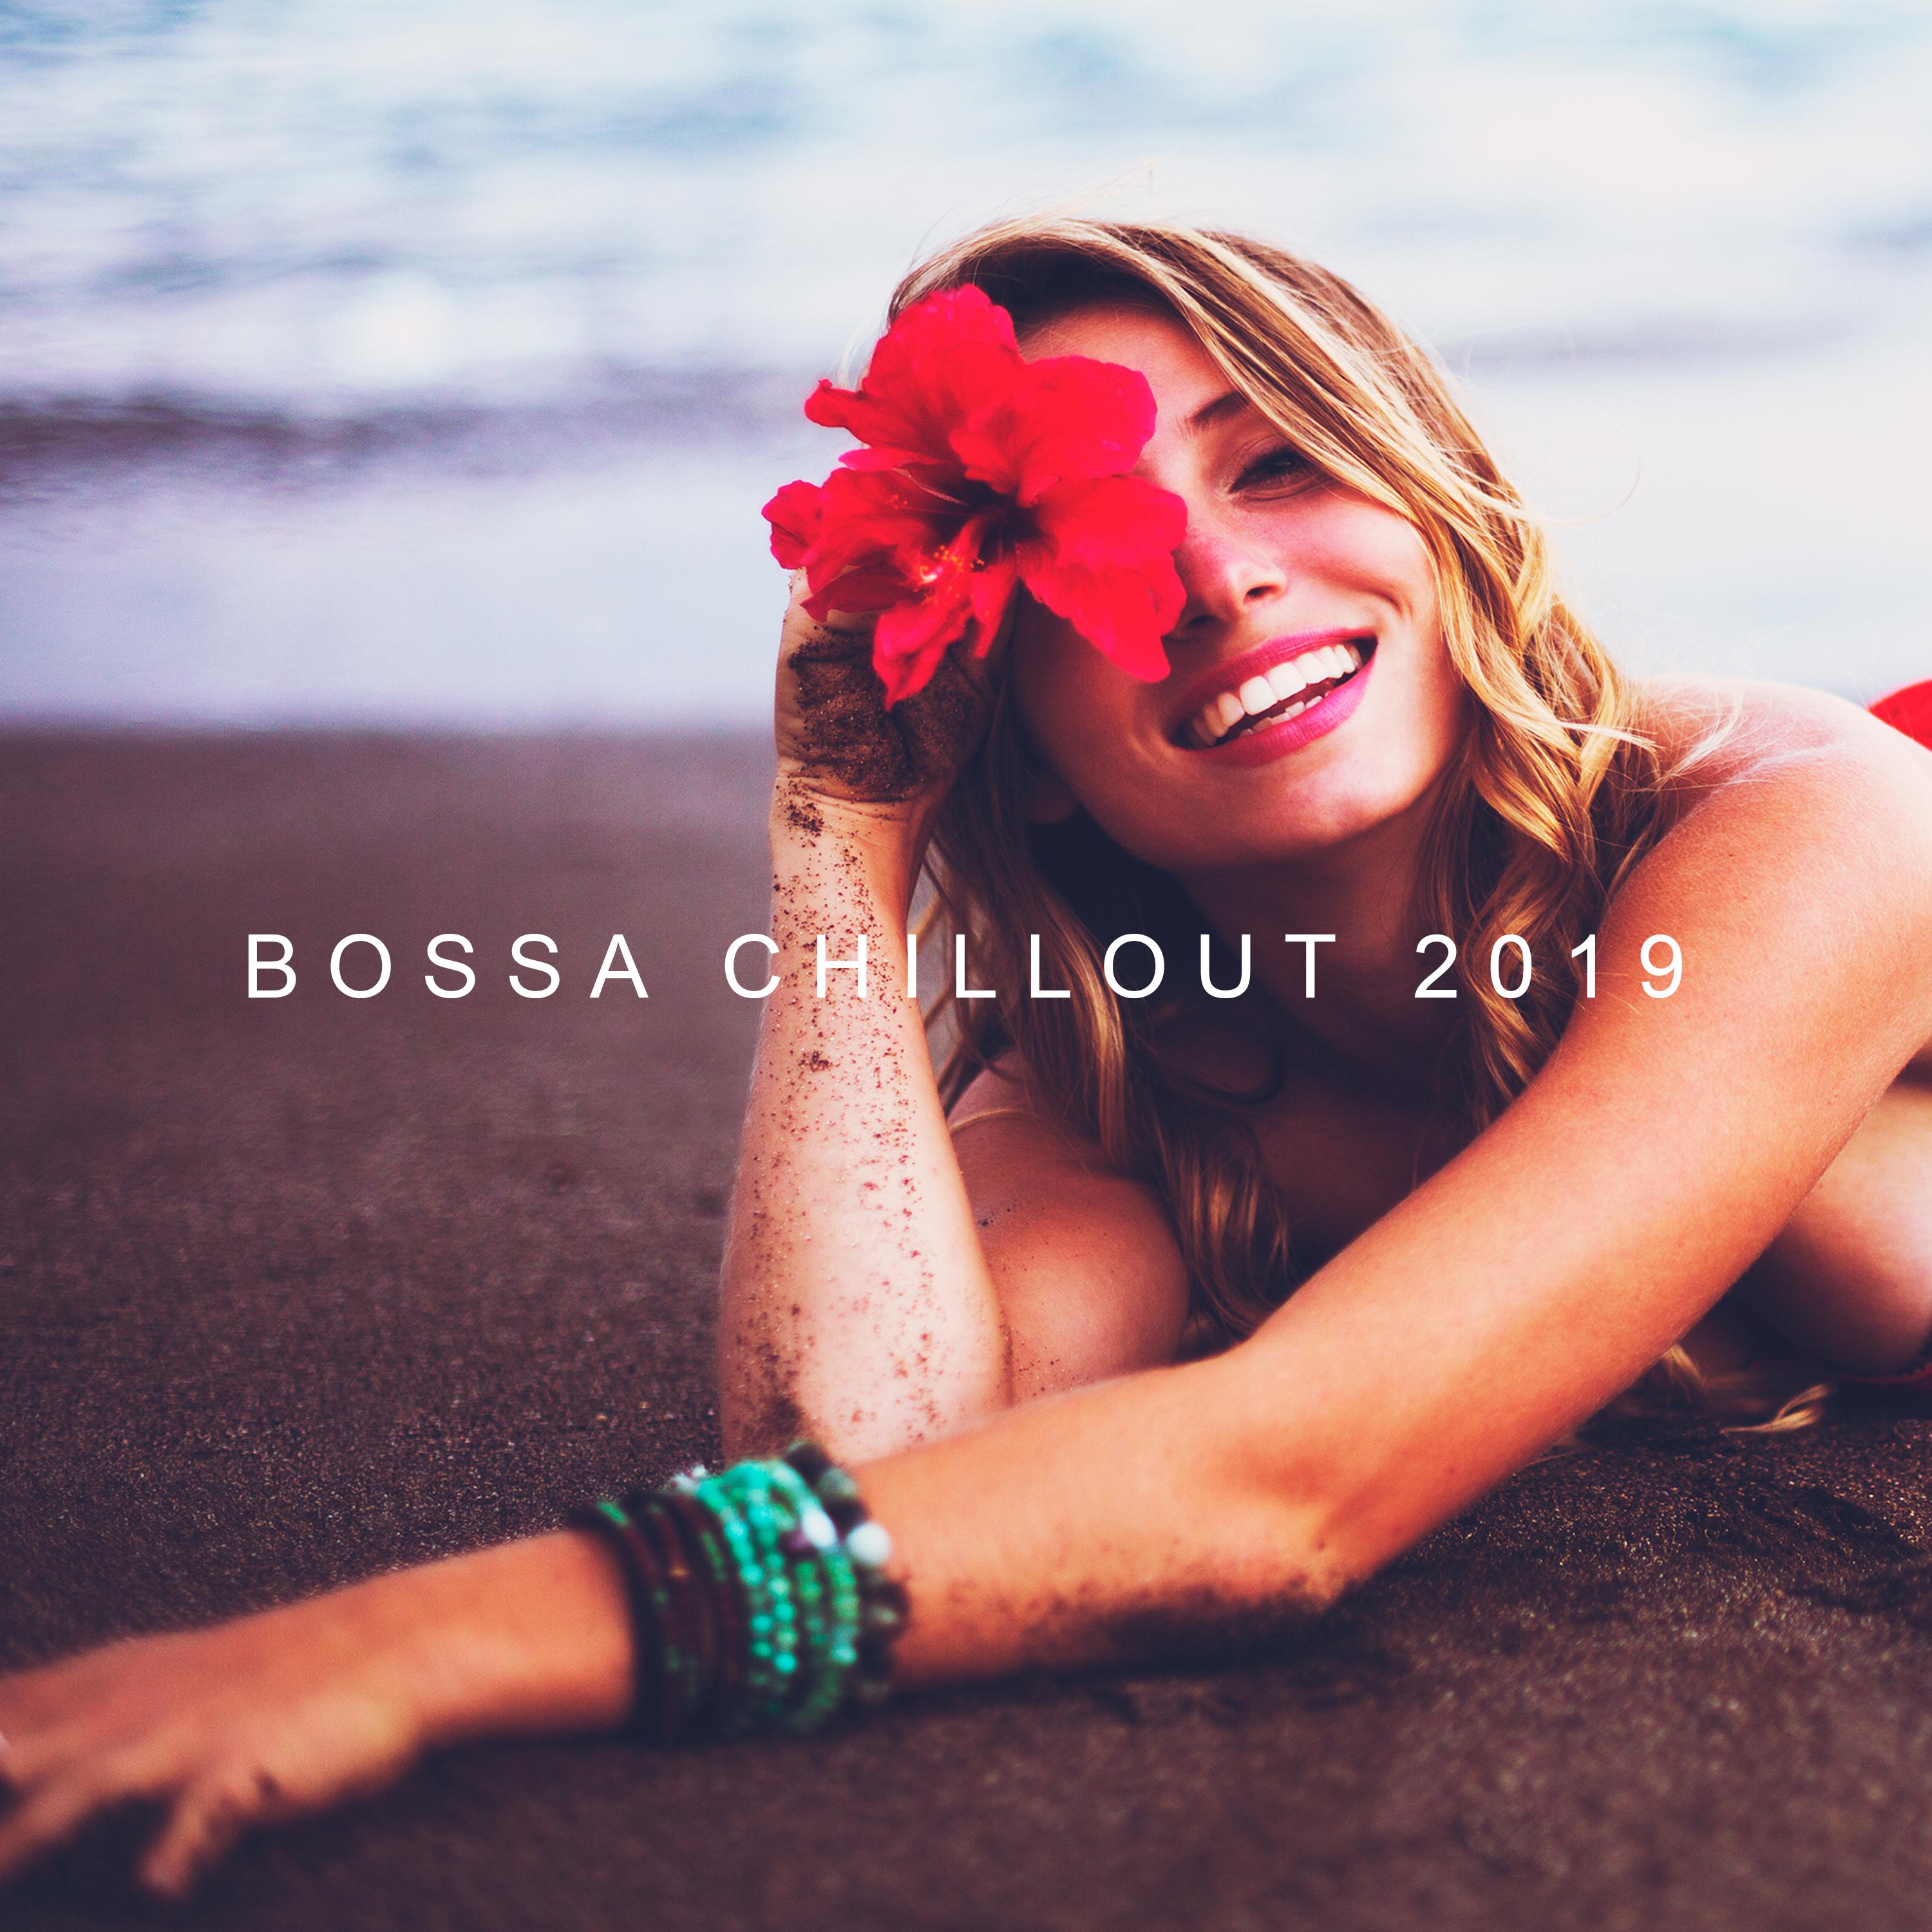 Bossa Chillout 2019: Compilation of Best Chill Out Electronic Music, Relaxing Deep Beats & Beautiful Ambient Melodies, Perfect Tropical Summer Vacation Background Sounds, Luxury Hotel Lounge Songs